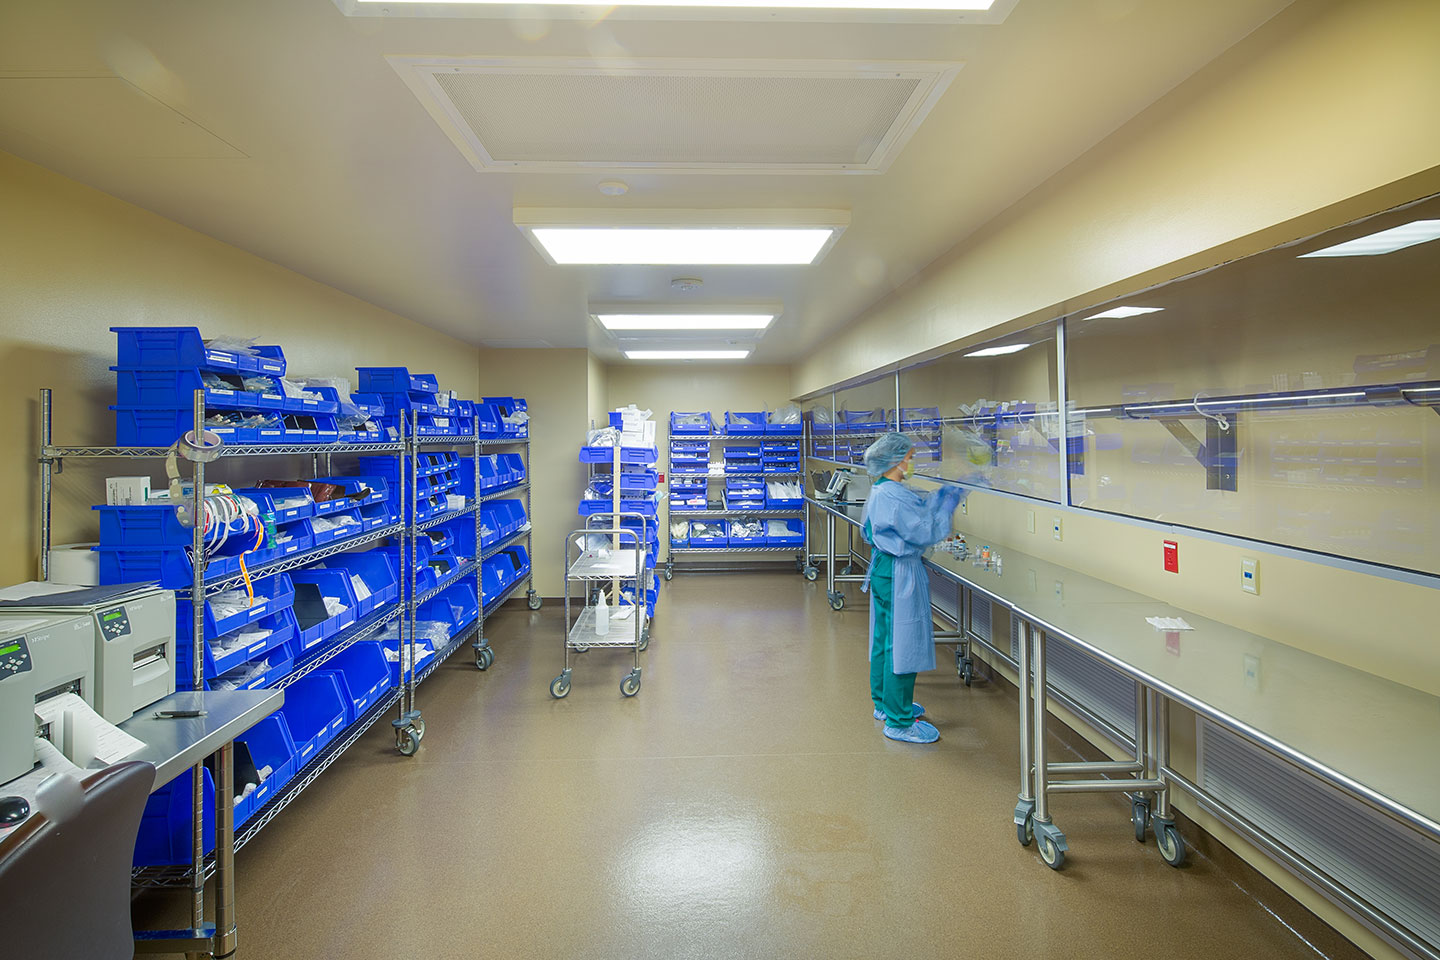 Pharmacies may need to renovate their facilities in order to accommodate new USP 800 standards.